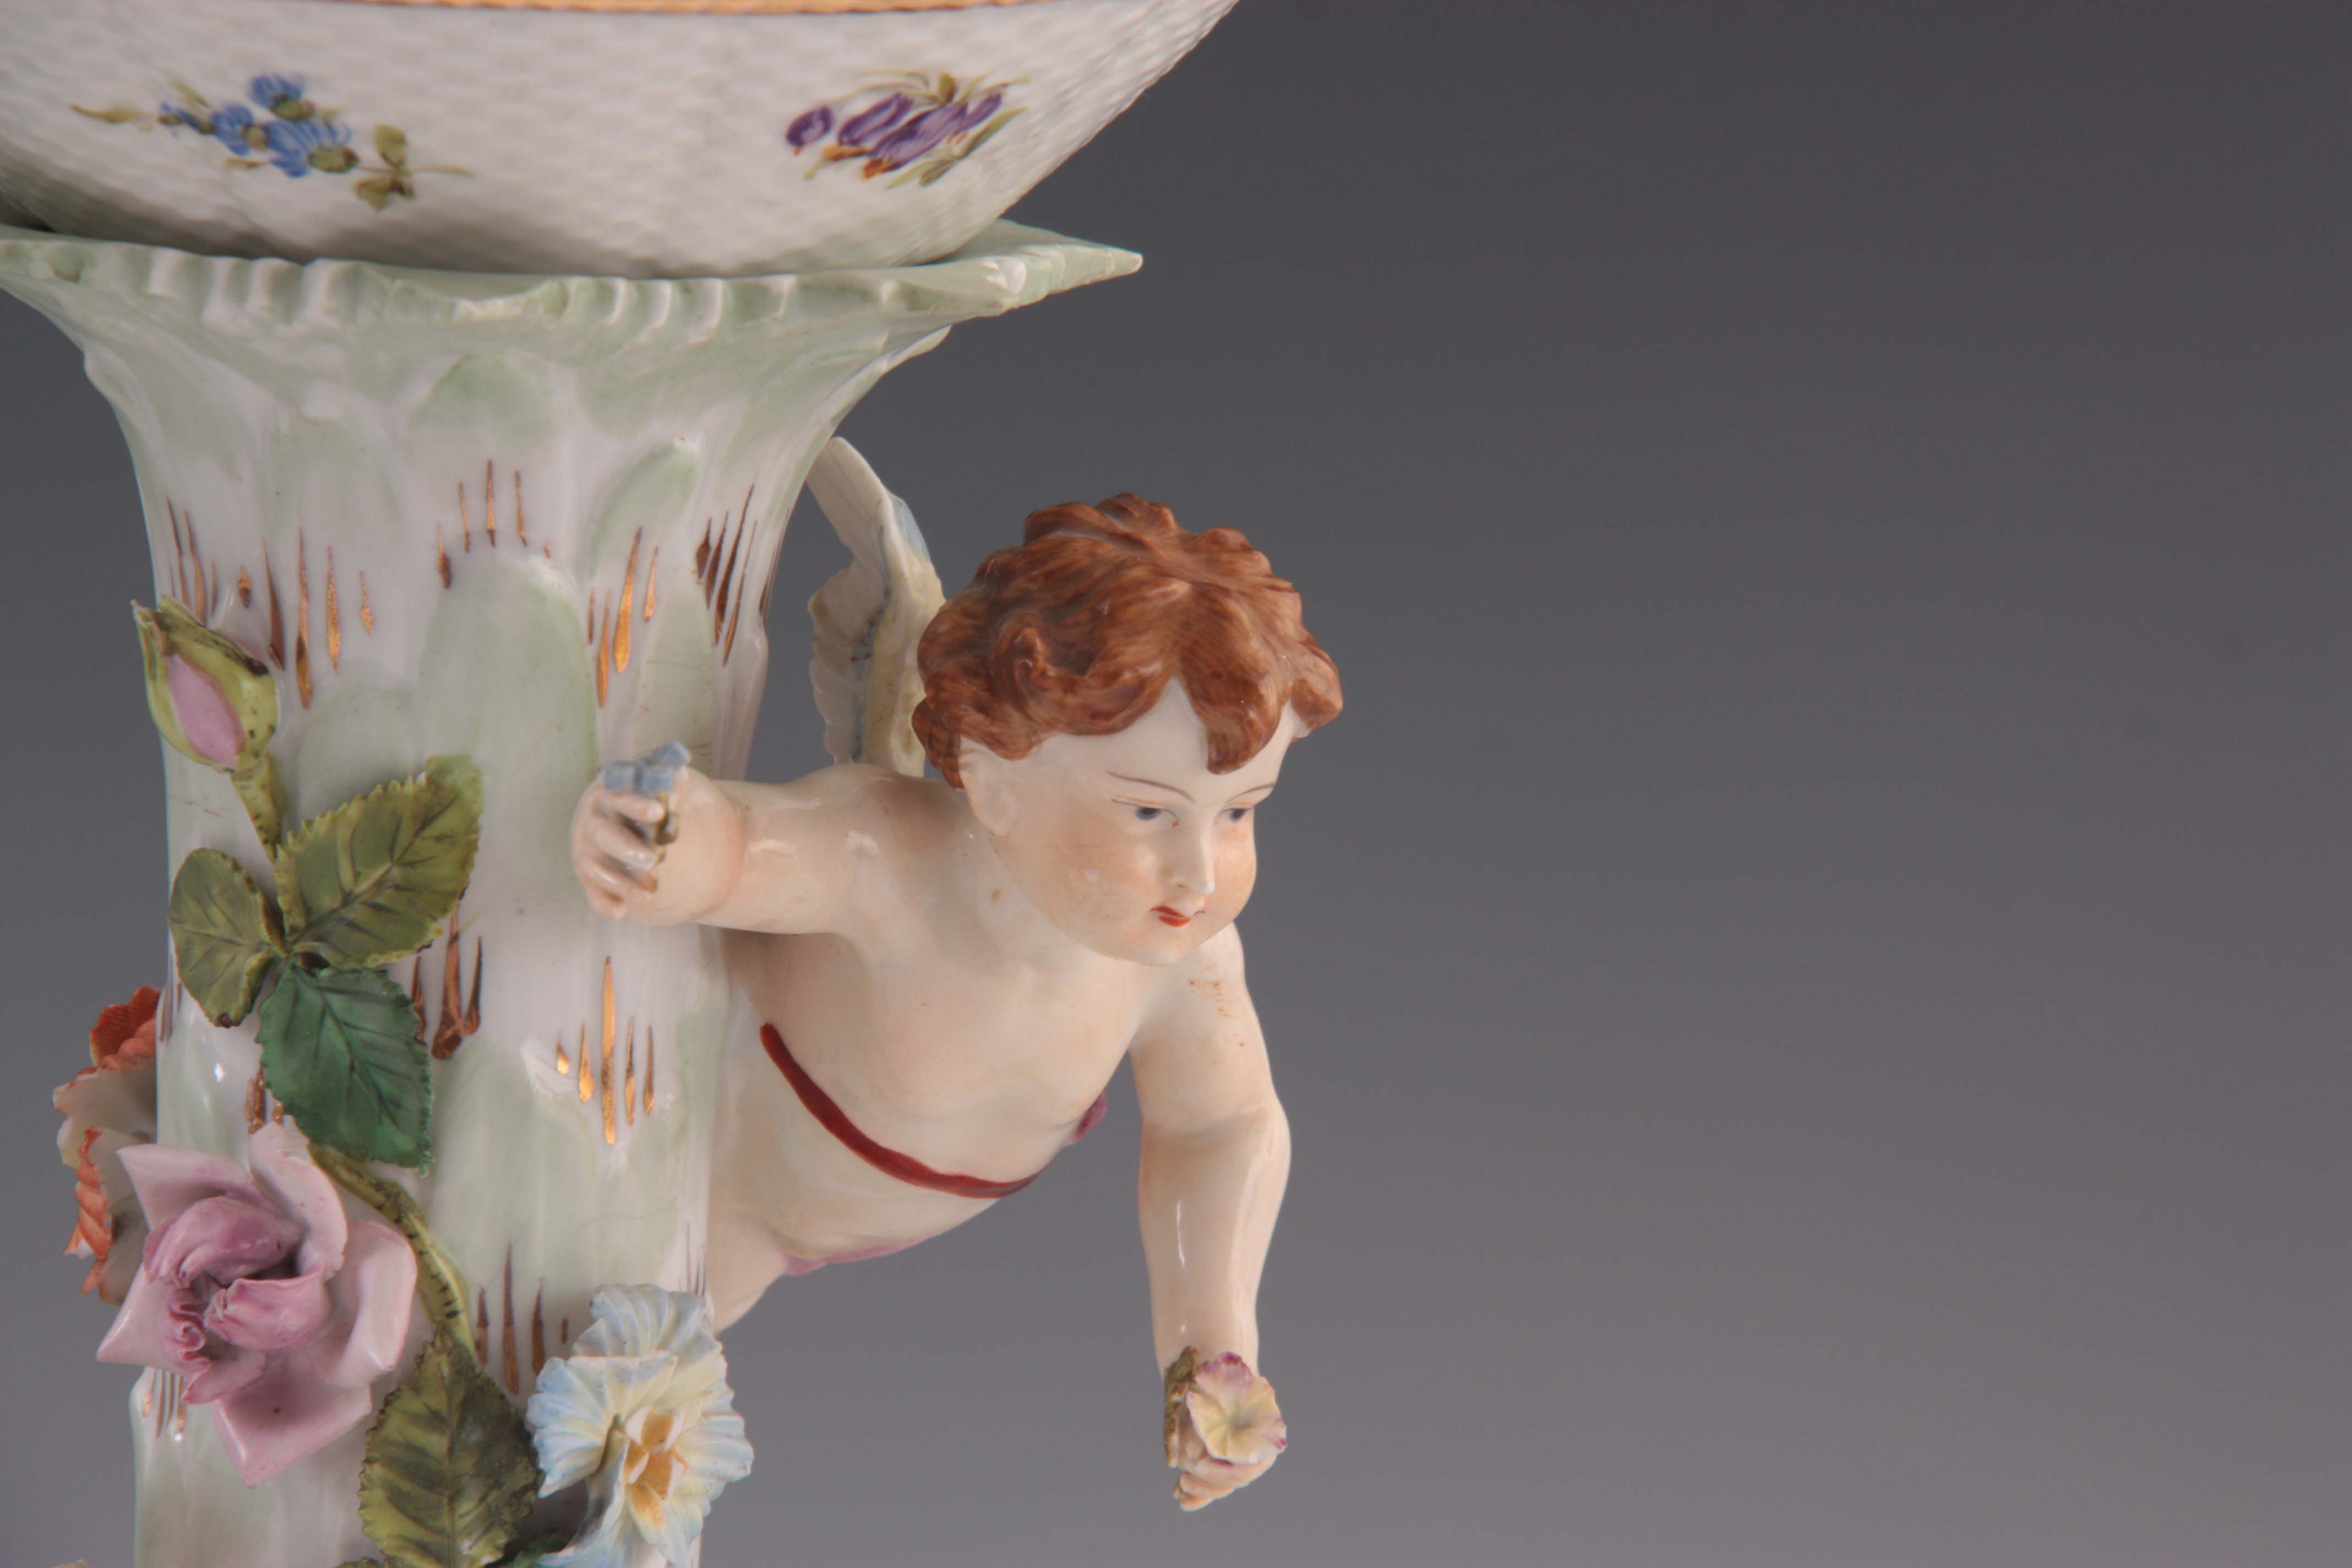 TWO 19TH CENTURY DRESDEN PORCELAIN COMPOTE CENTREPIECES with figural cherub bases and pierced basket - Image 4 of 9